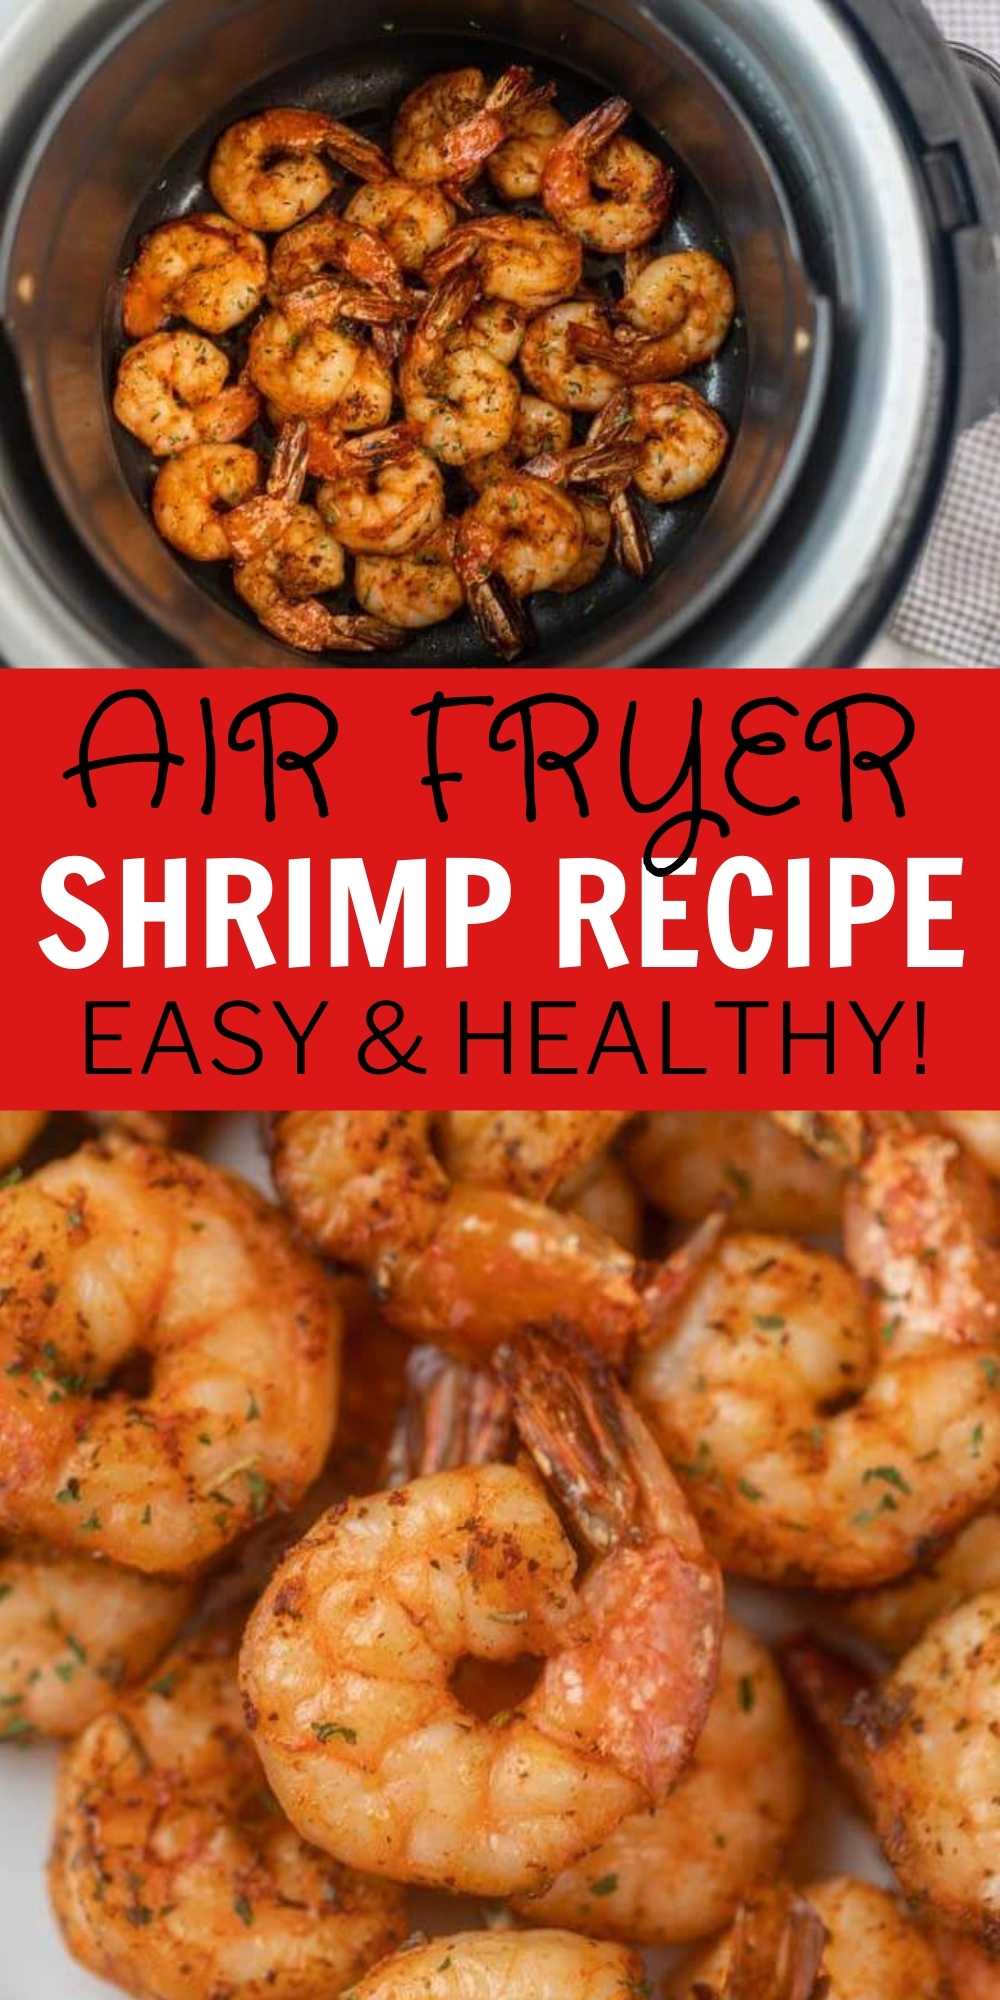 This air fryer shrimp recipe is a healthy dinner and ready in under 10 minutes! The air fryer makes juicy and crisp shrimp that is perfect! This easy air fryer shrimp recipe is perfect to eat by itself or to serve in tacos or on a salad!  Everyone loves this easy to make shrimp recipe.  #eatingonadime #airfryerrecipes #shrimprecipes #healthydinners 
